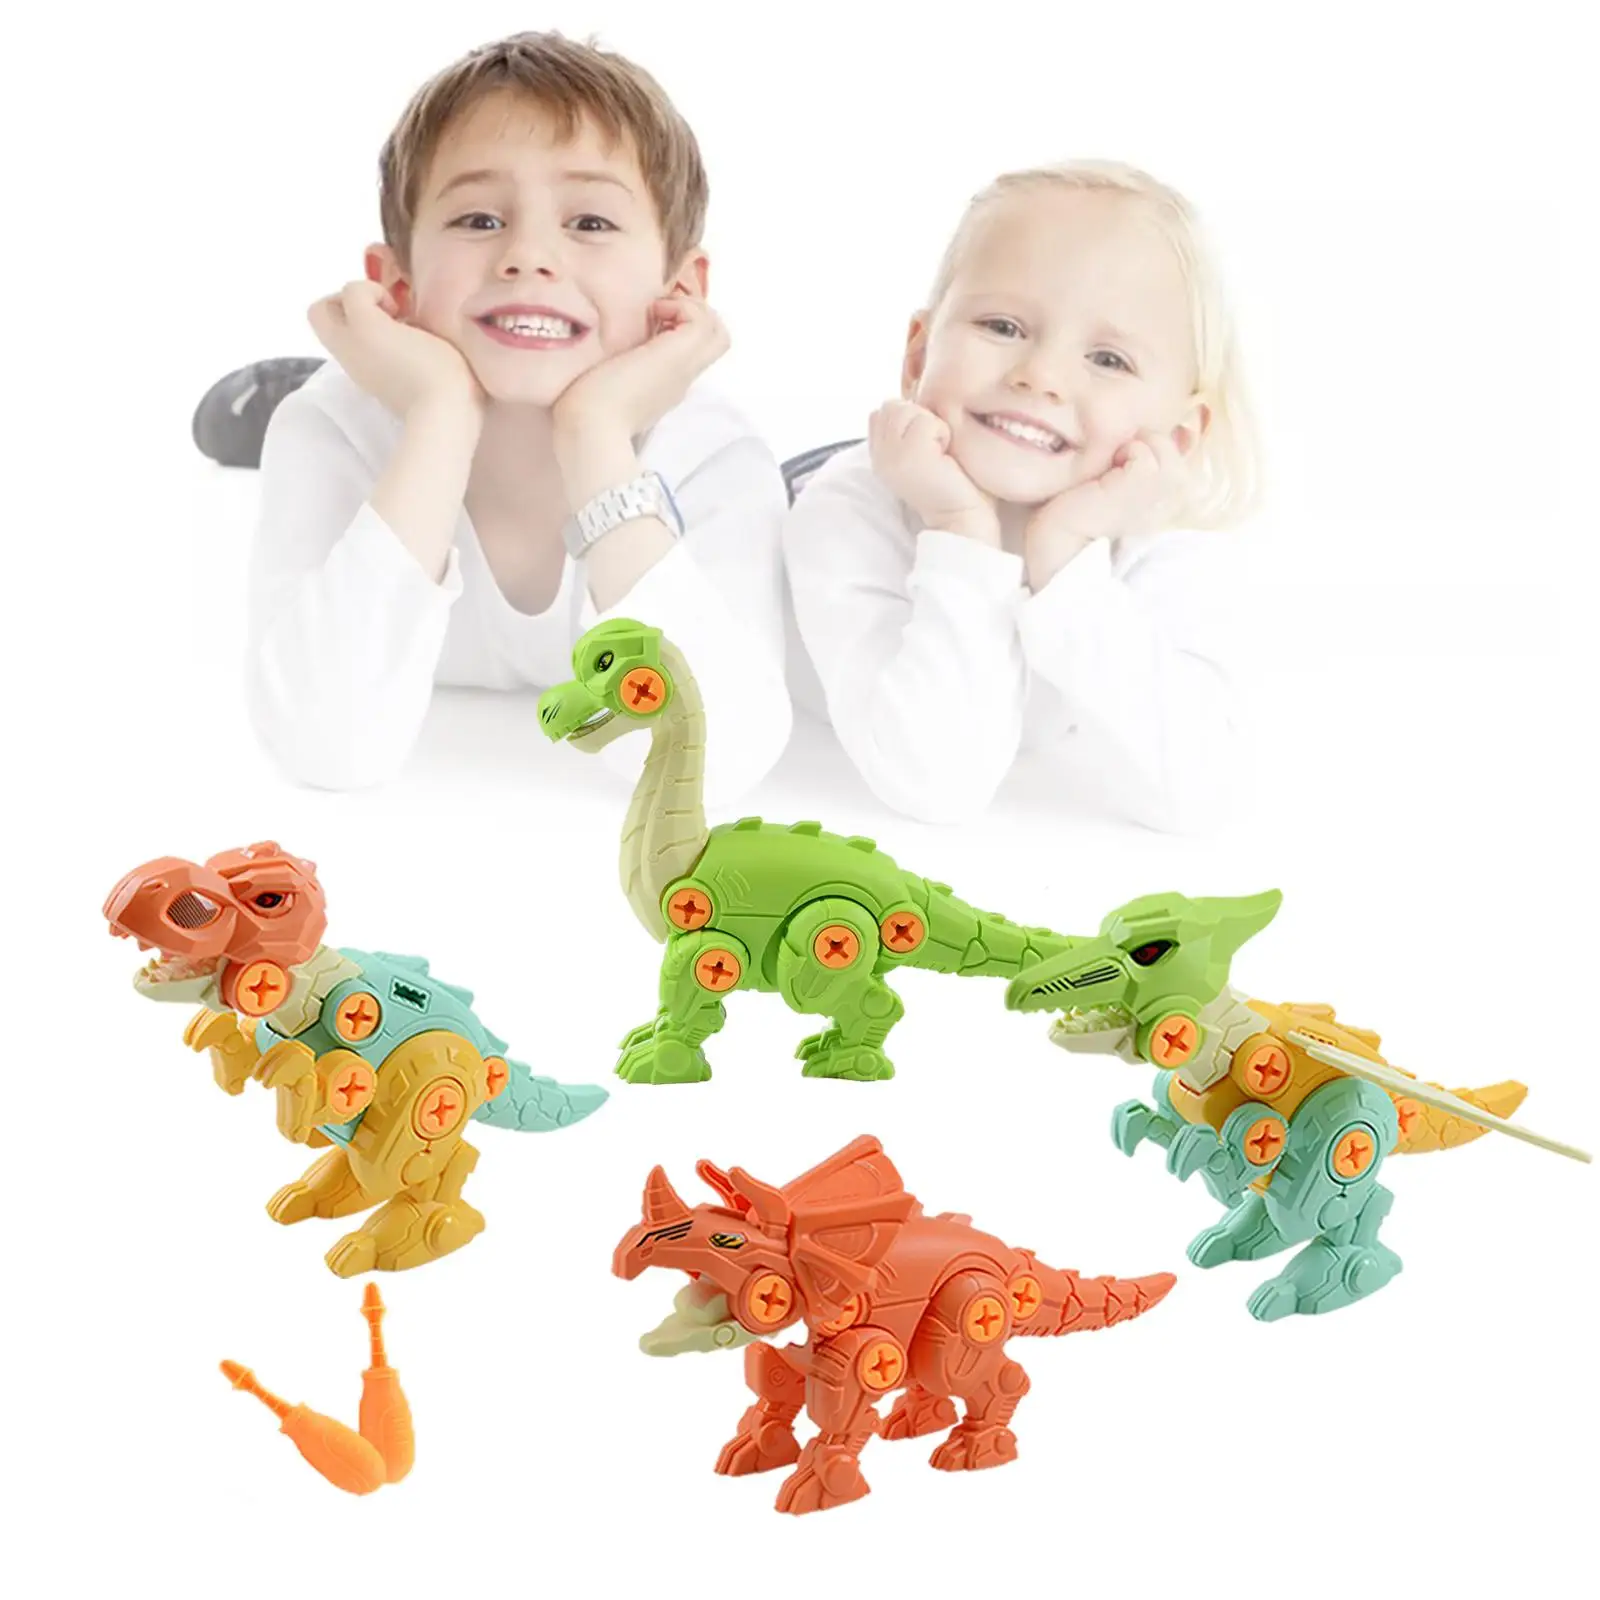 4 Pieces DIY Assembly Dinosaur Toys Set Construction Toy with Screwdriver Educational Toy Christmas Gifts for Kids Children Boys